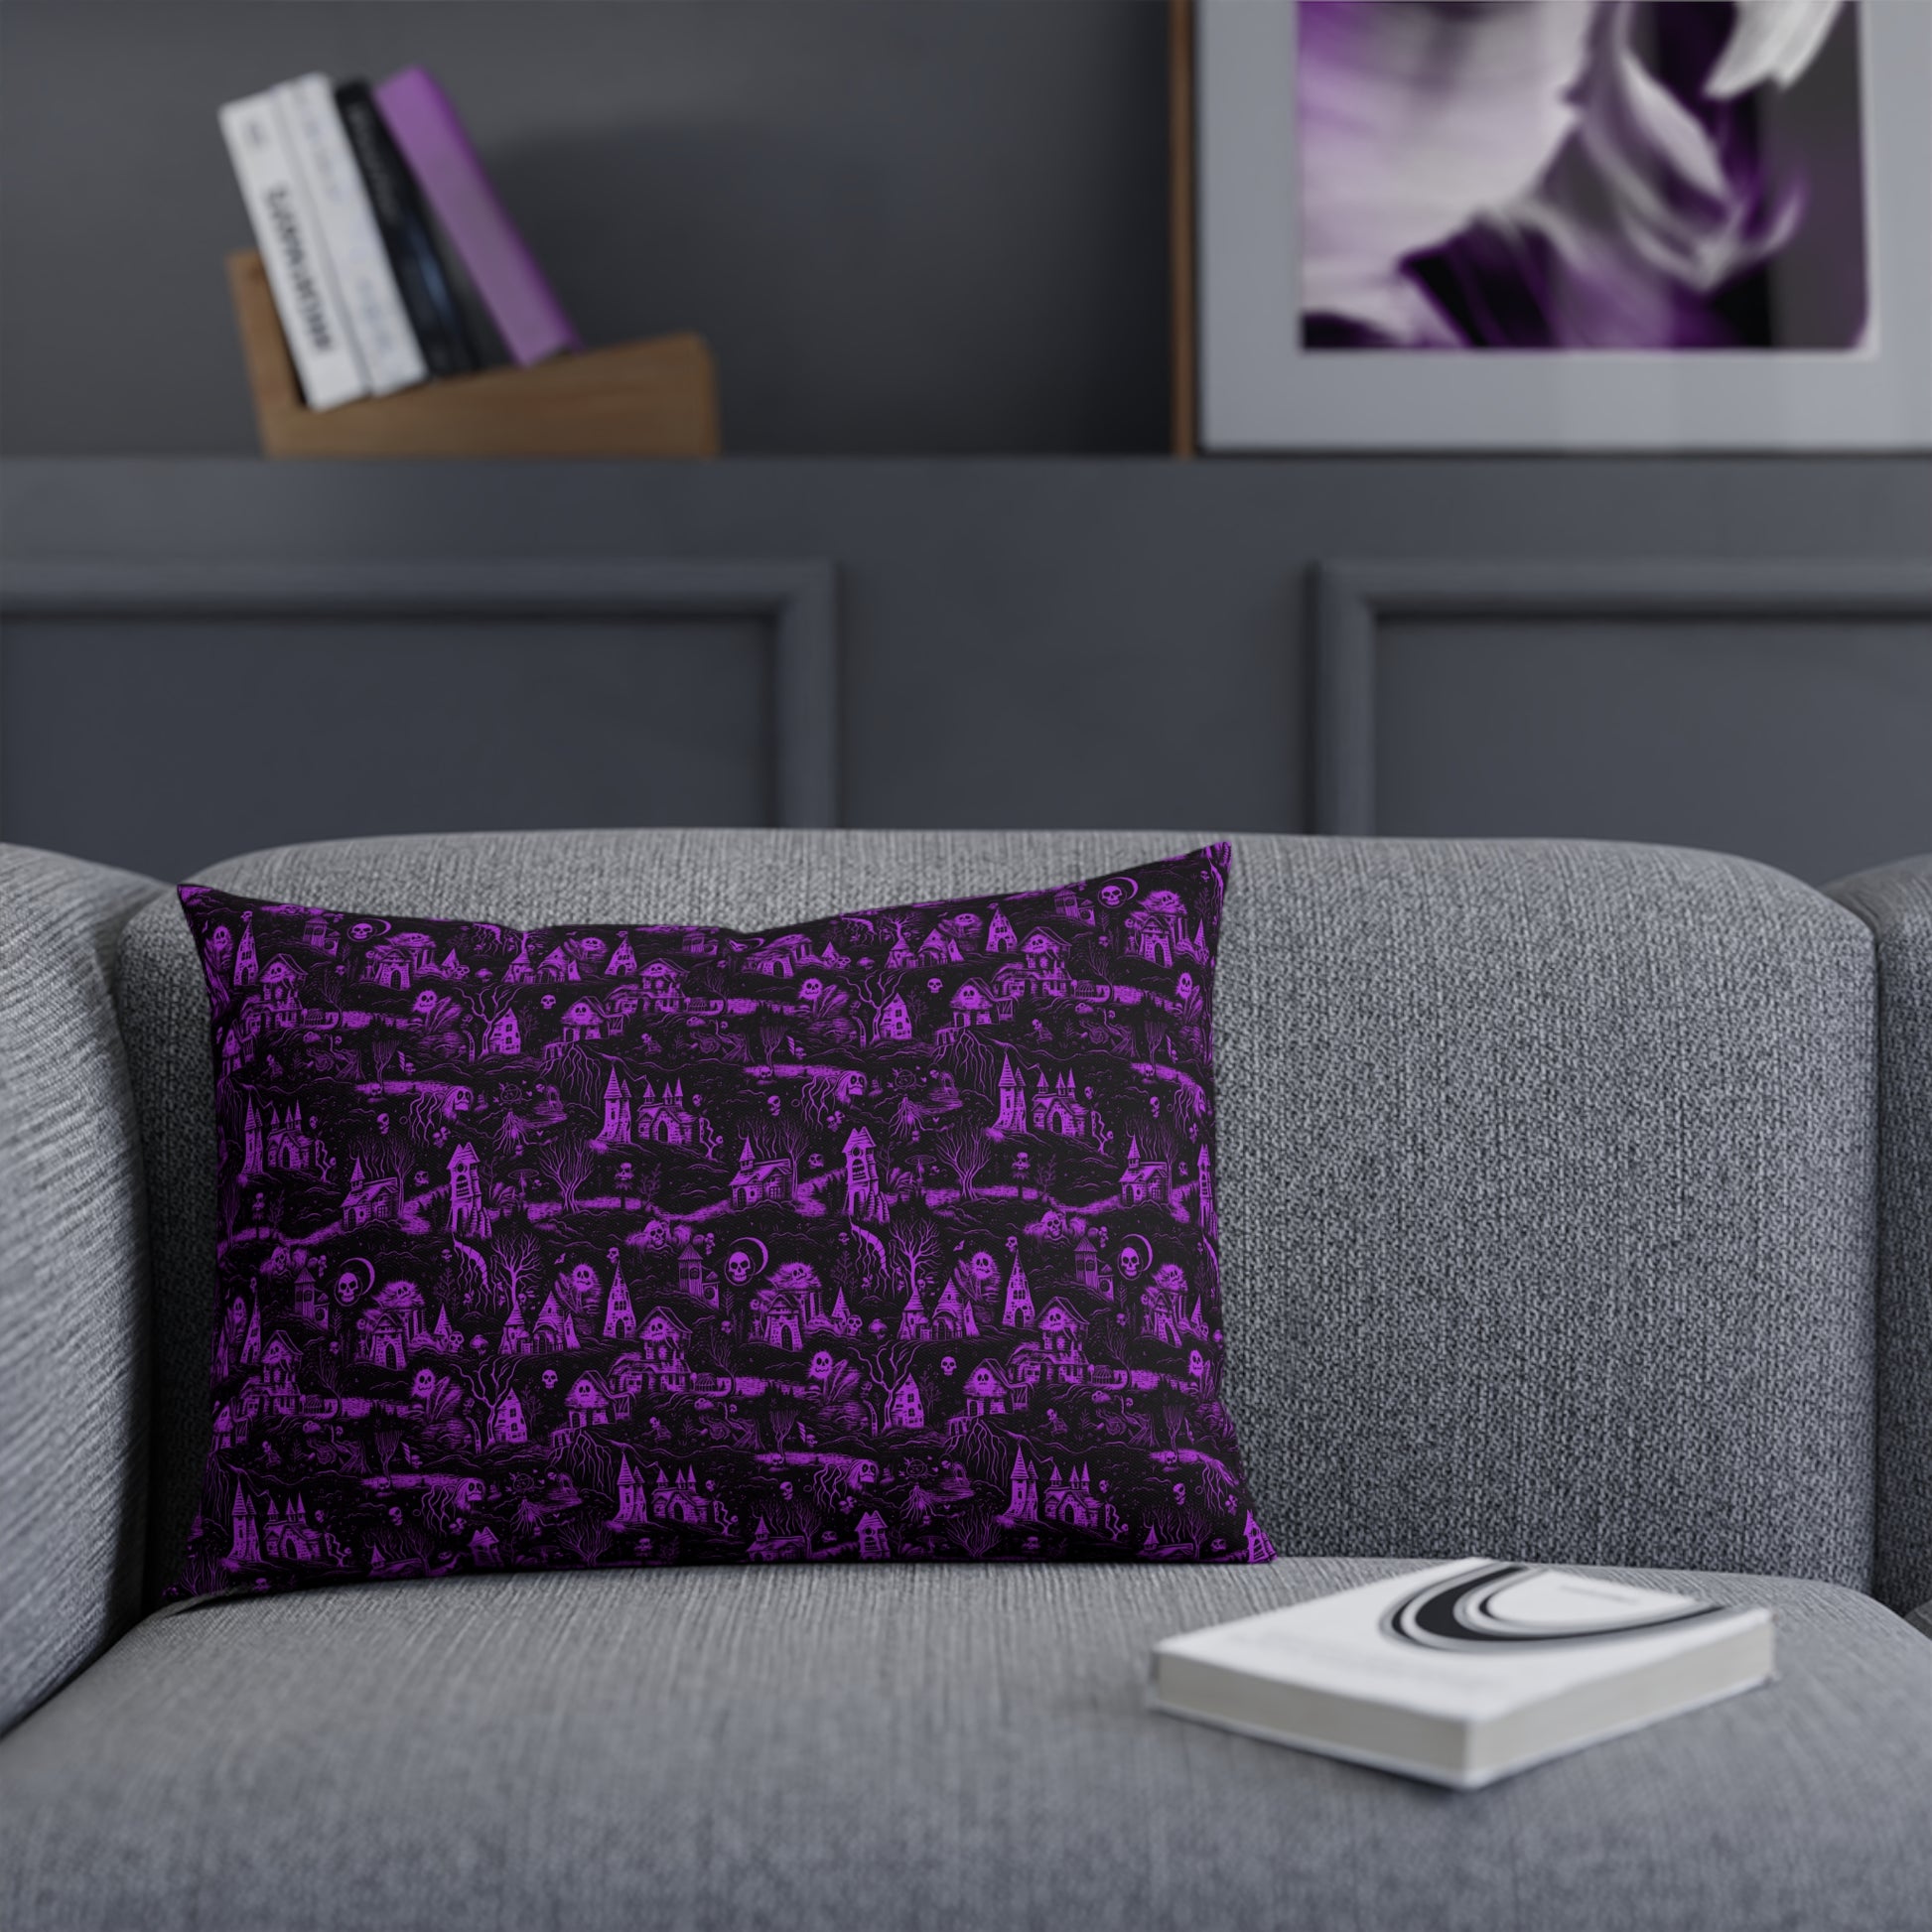 Cushions Spooky Ghosts in Purple - Frogos Design